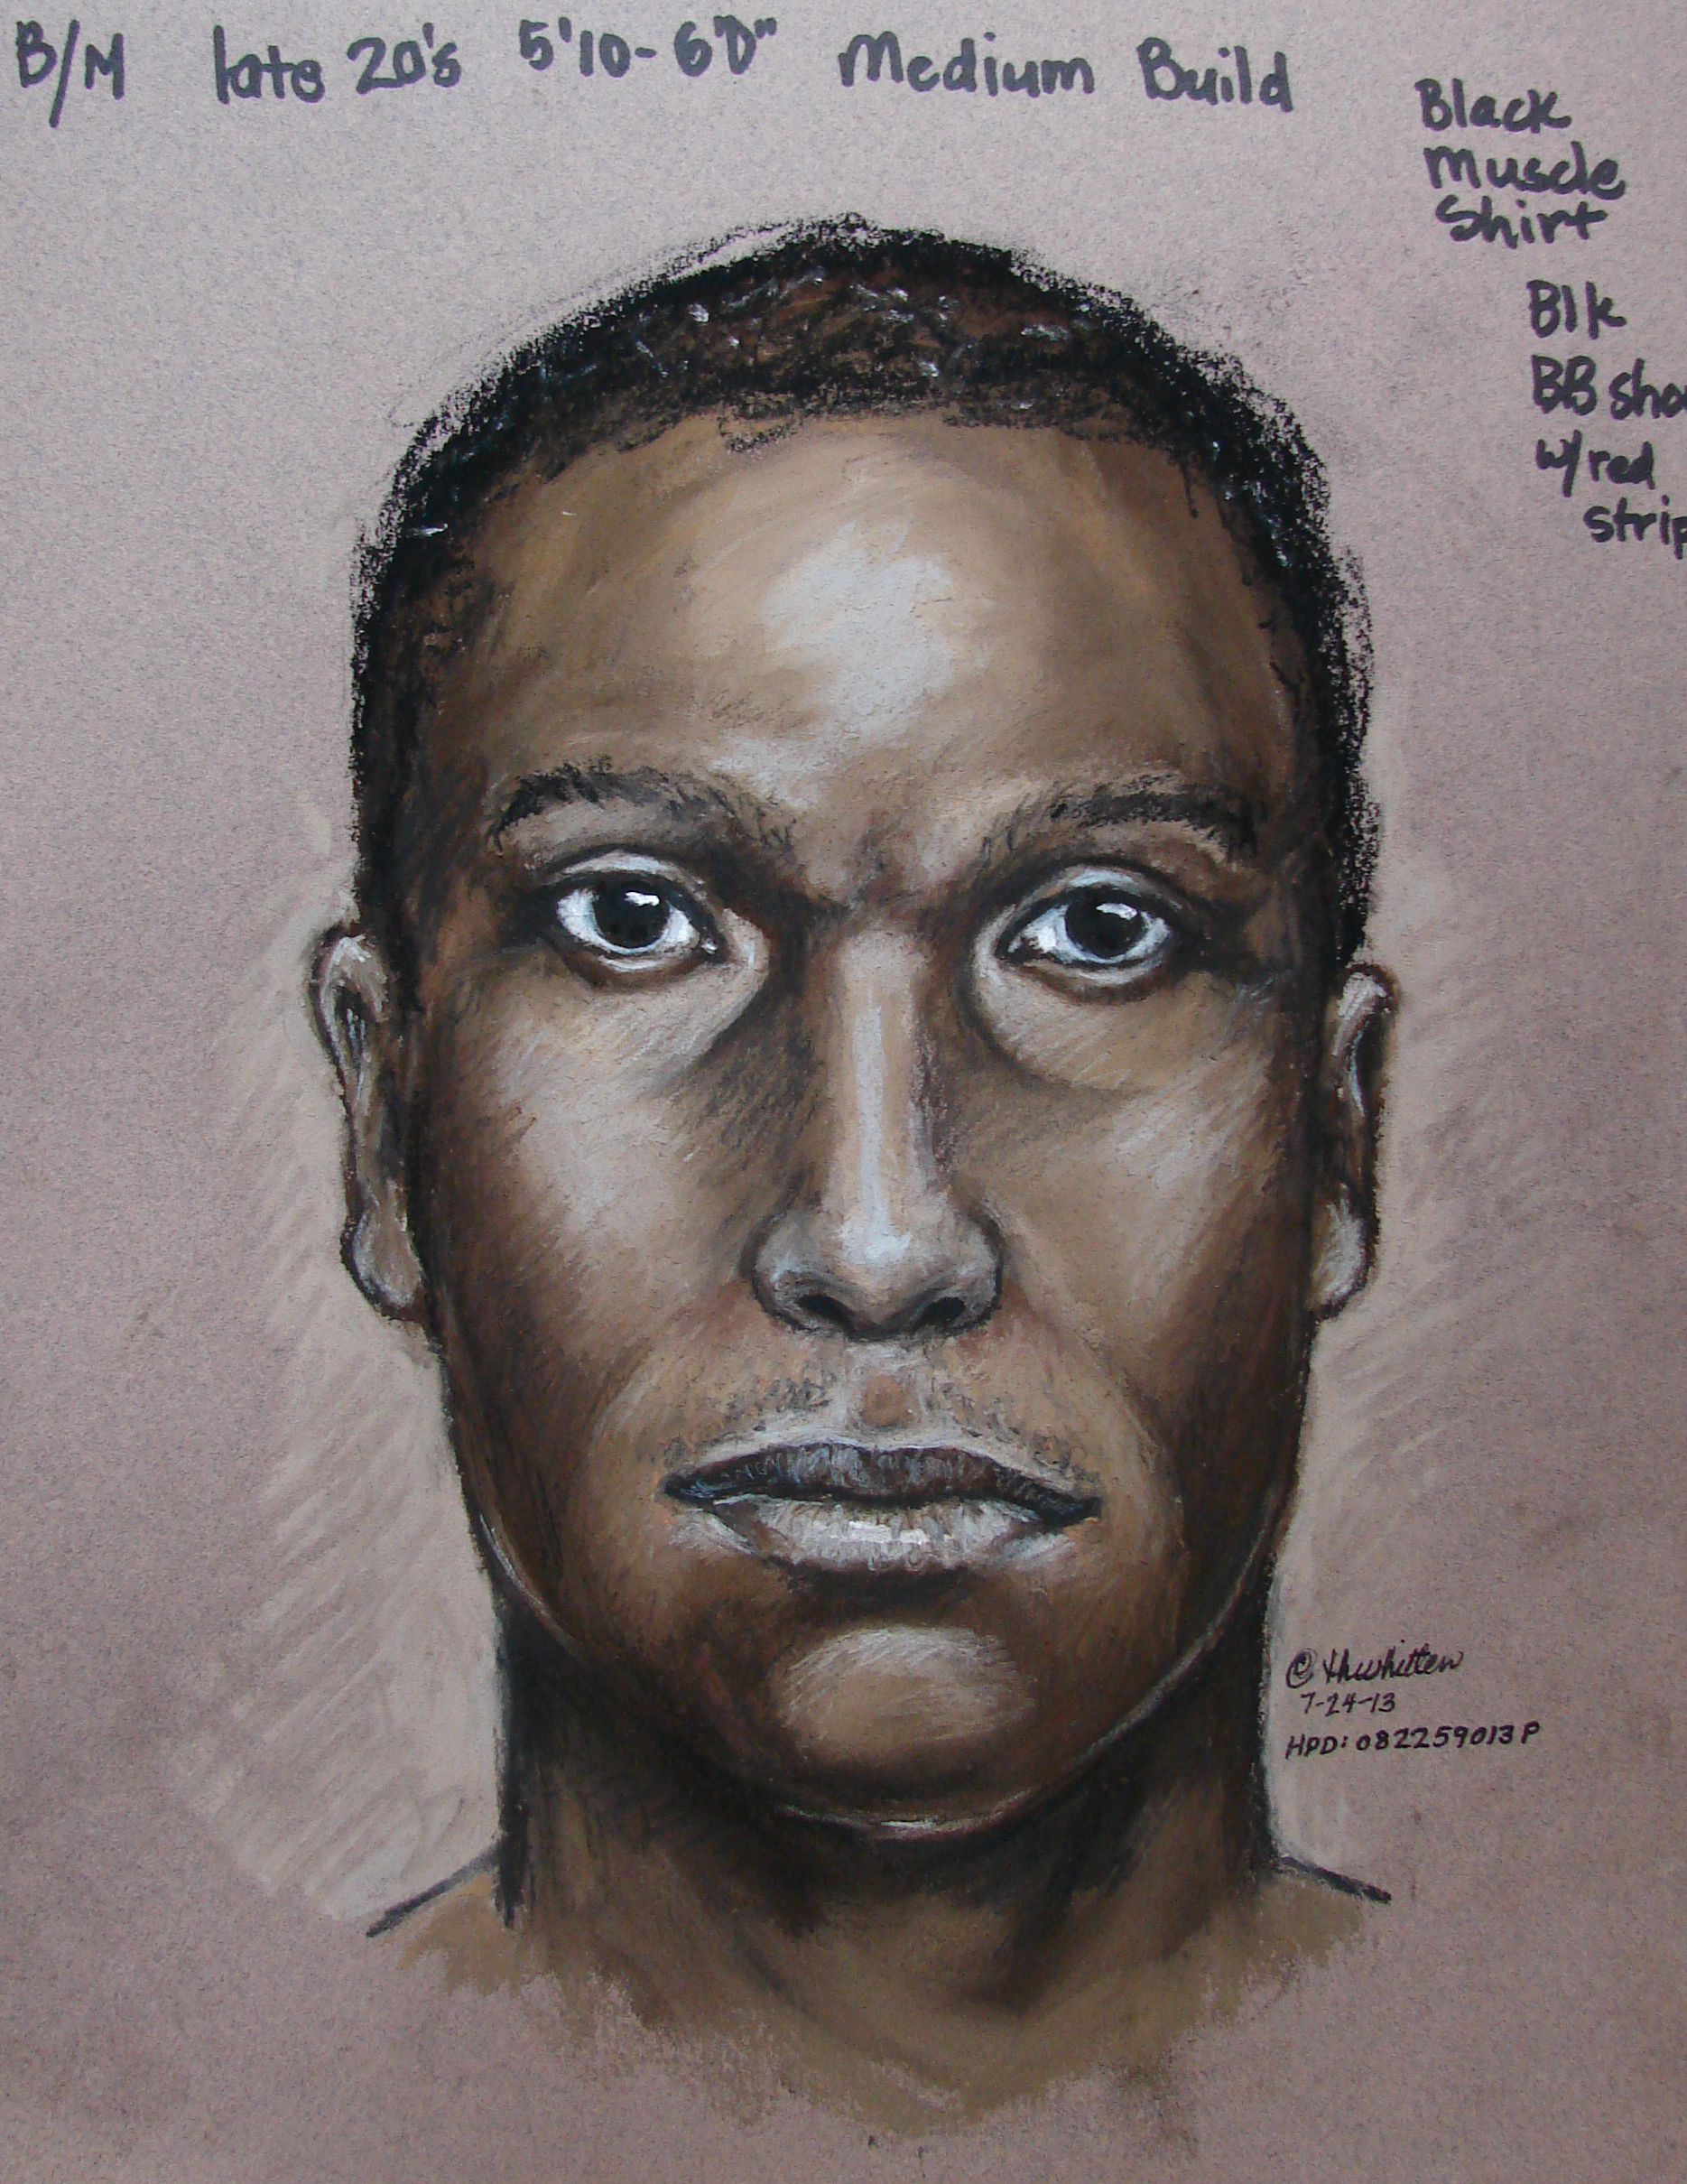 A composite sketch of the wanted suspect